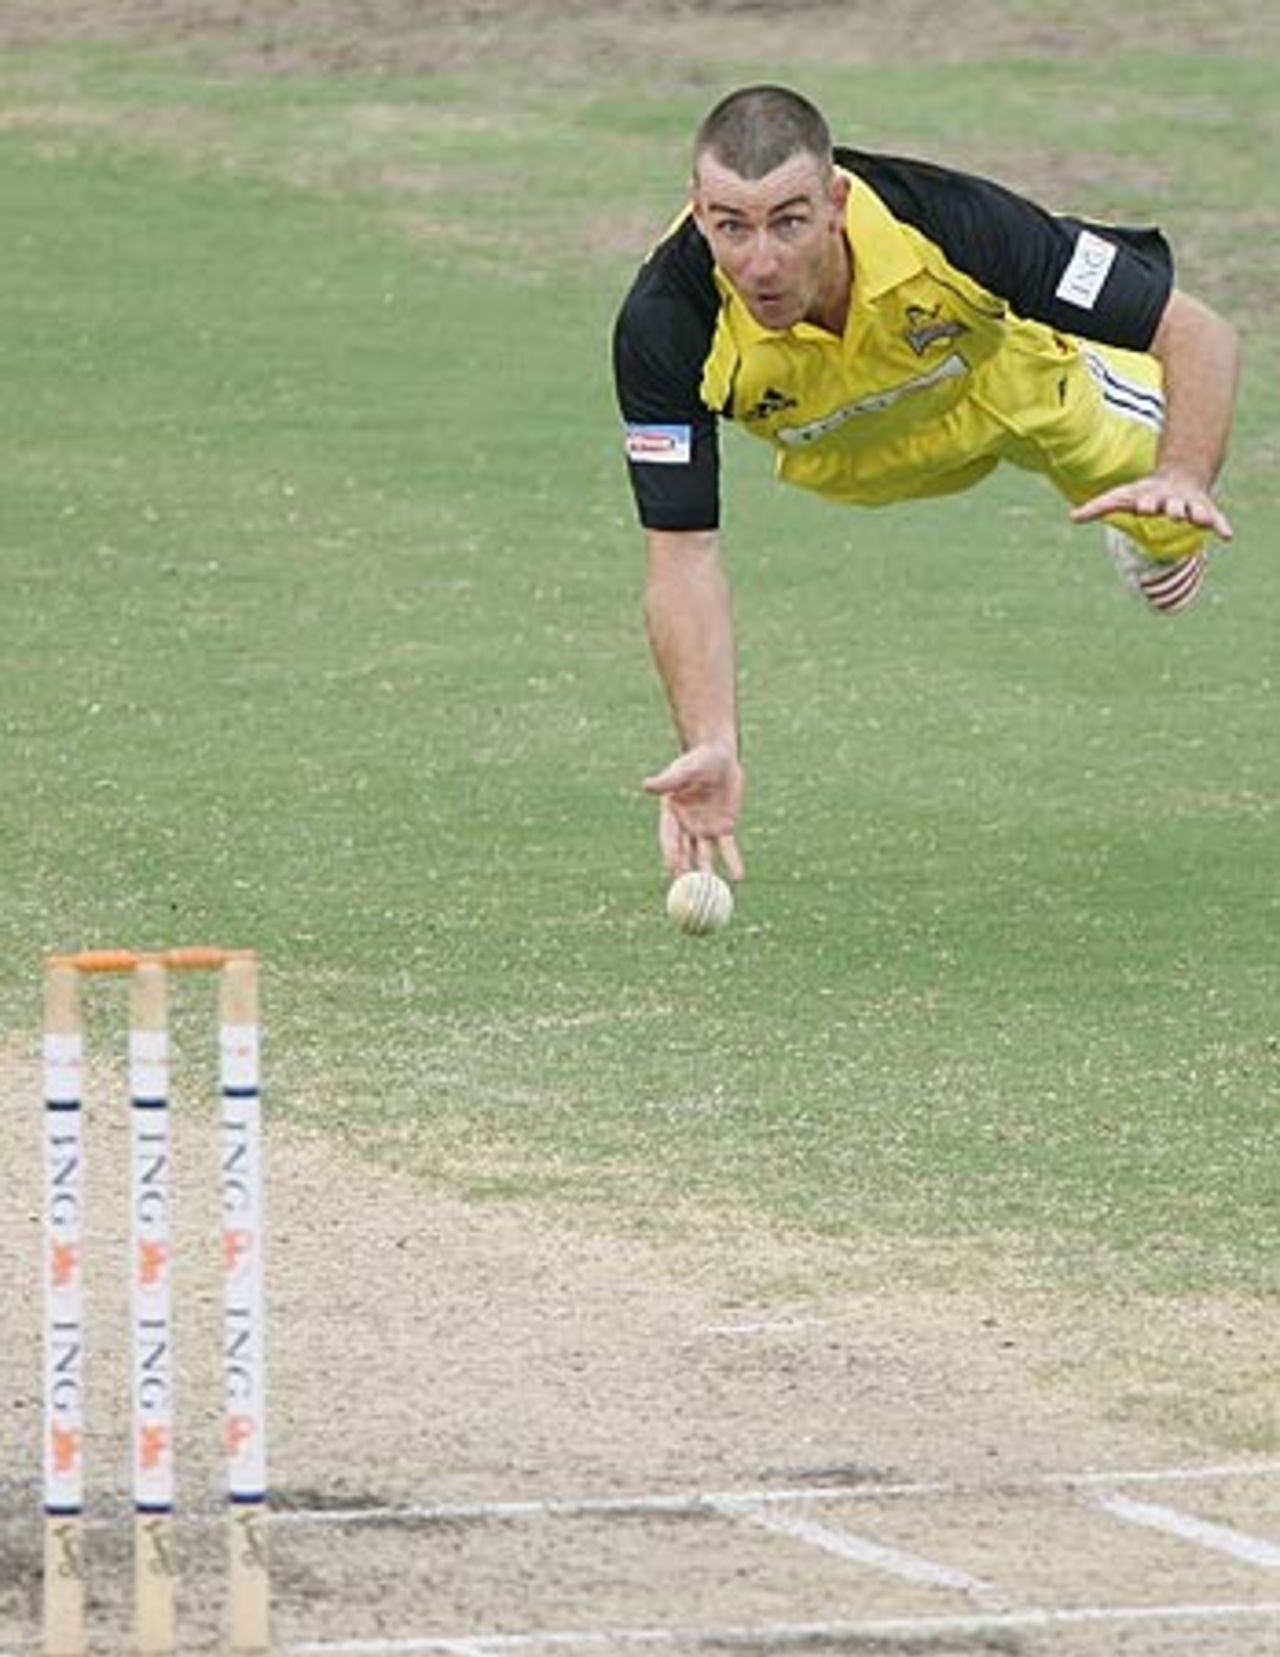 David Bandy dives attempting a direct hit, Western Australia v South Australia, ING Cup, Perth, January 25 2006